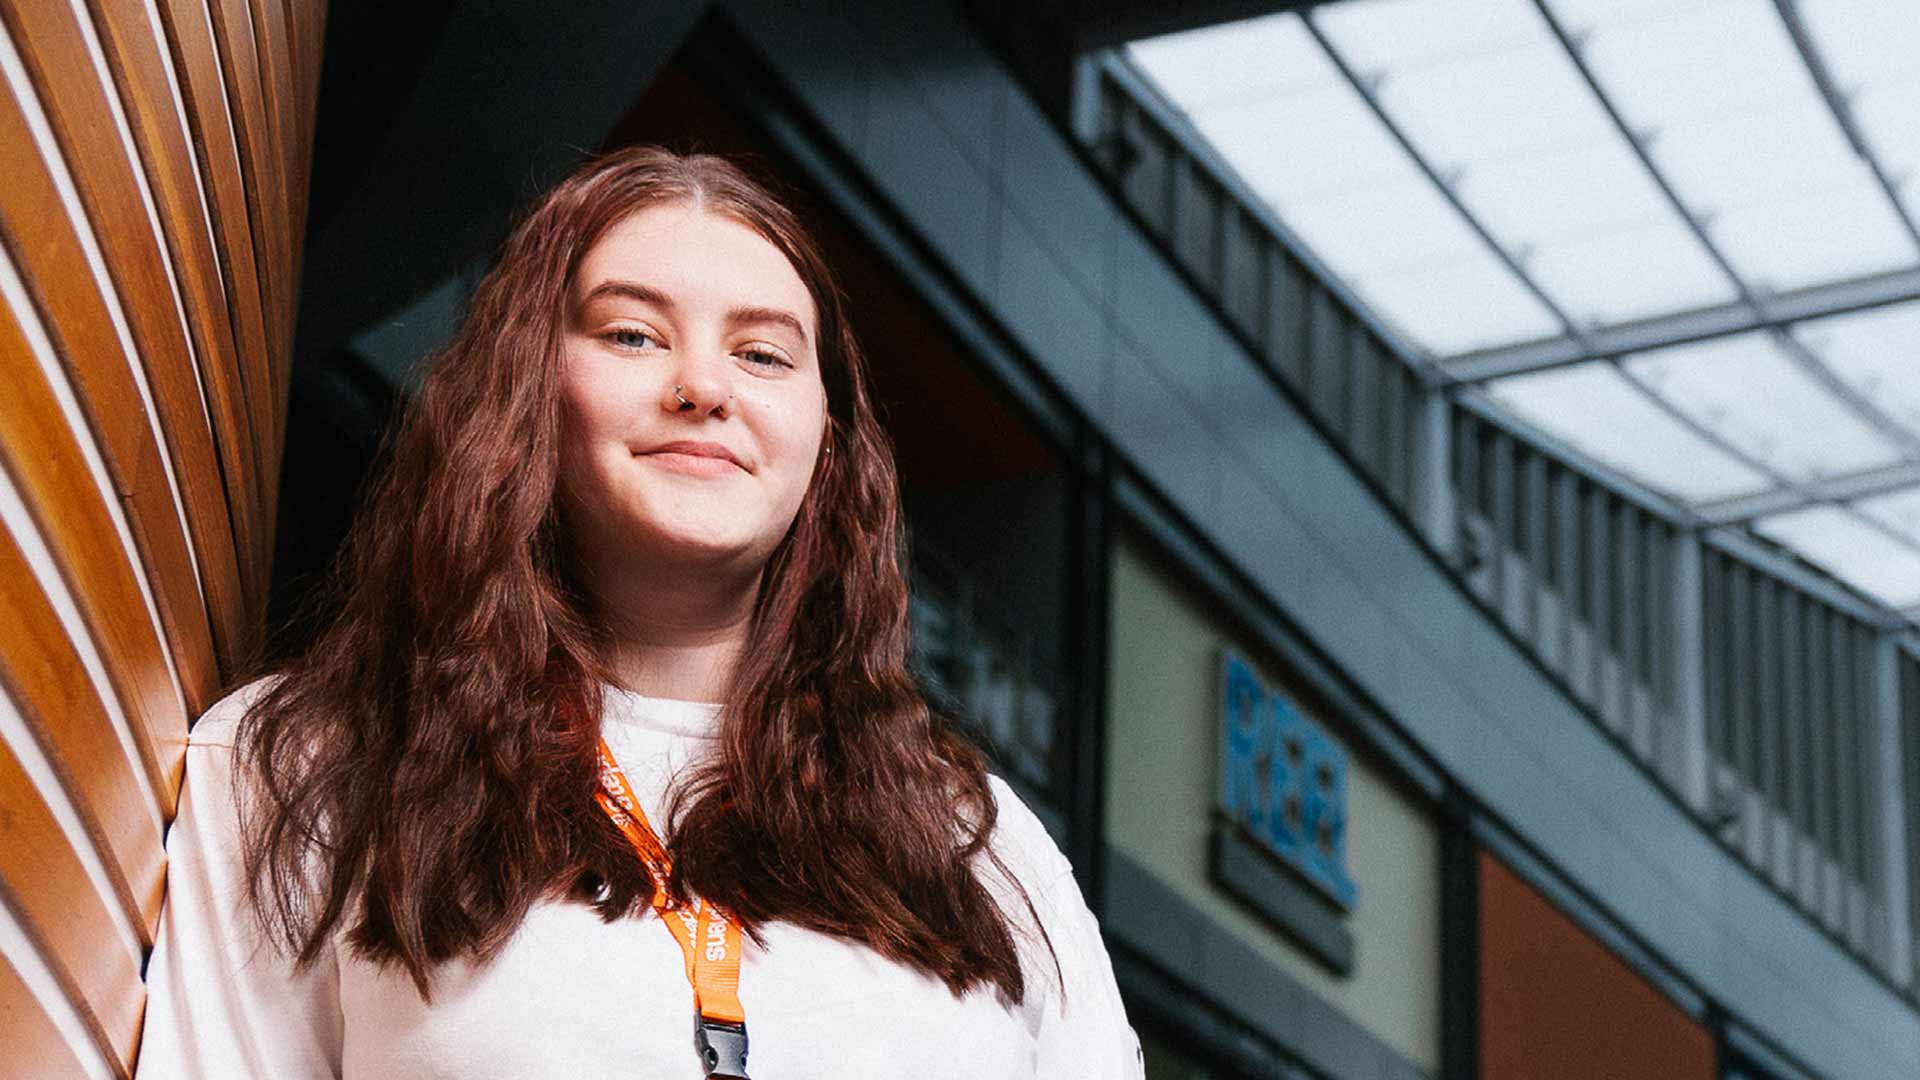 Student Rhyanna stands proud and smiling, leaning against a wooden wall in a shopping centre. A number of shop fronts are visible in the background.